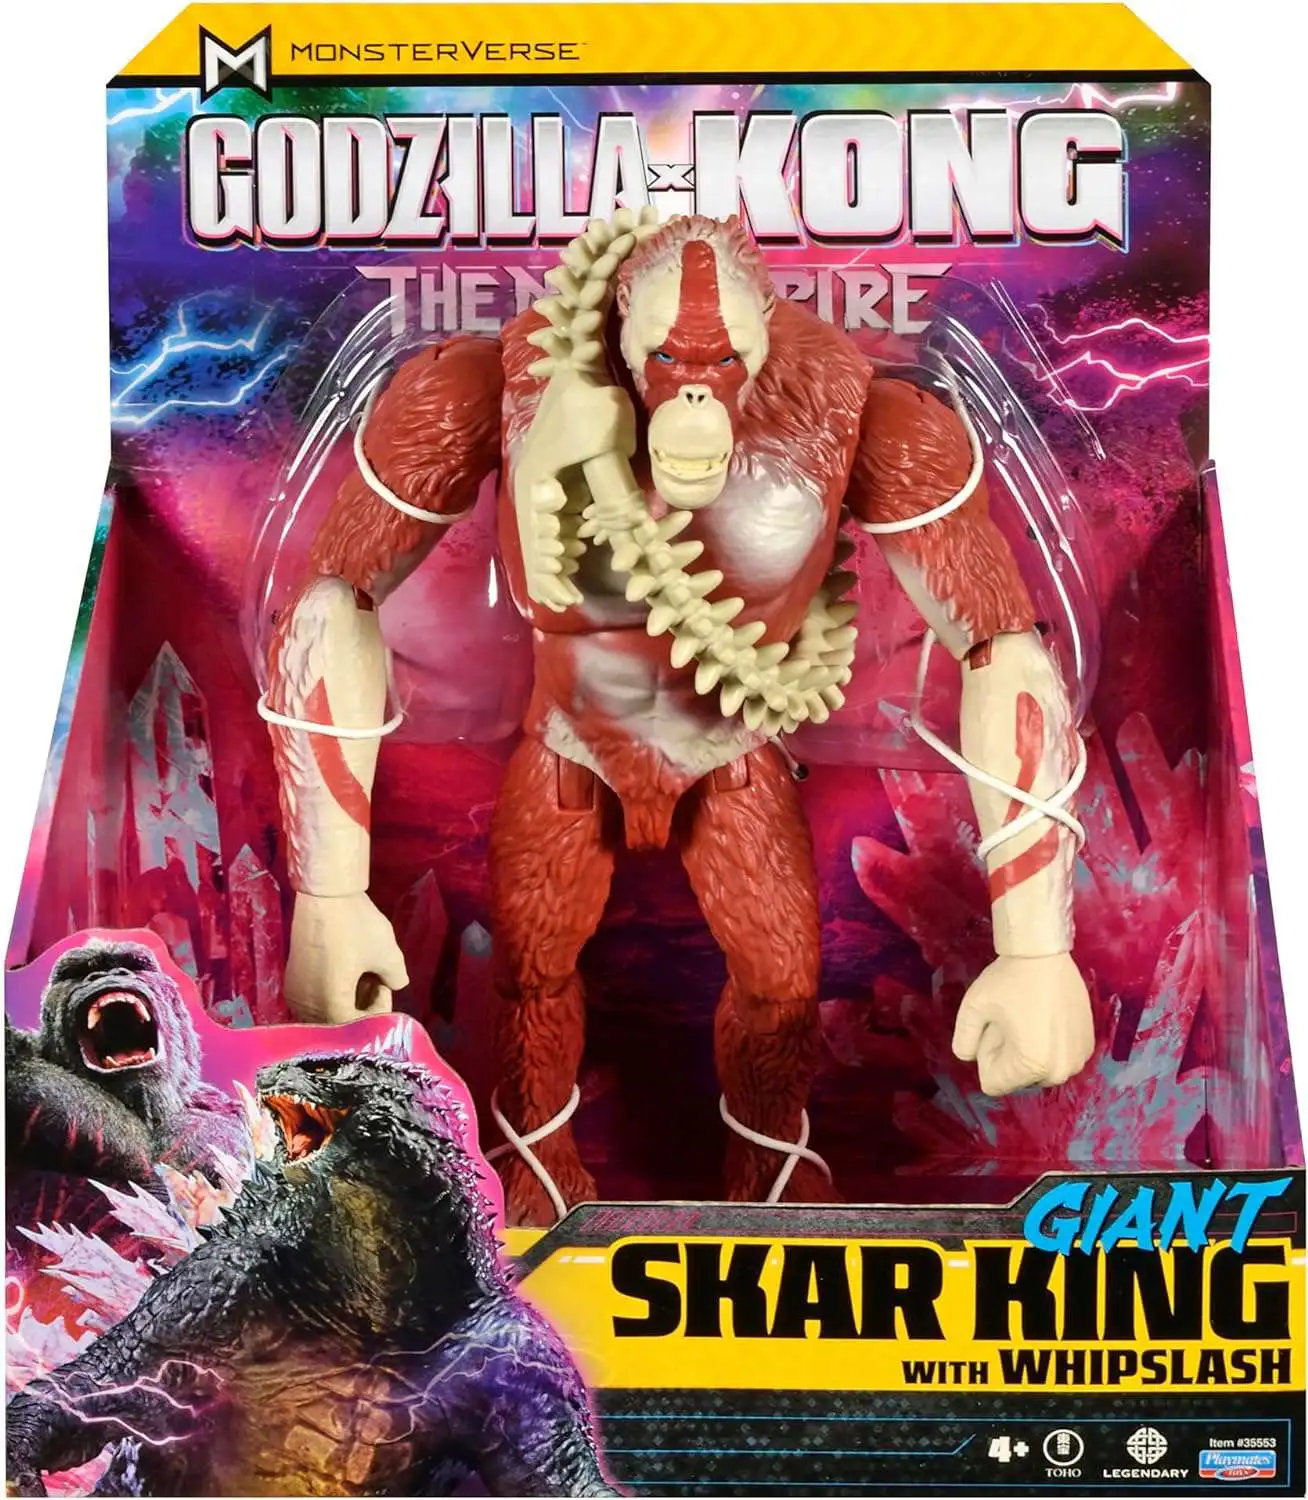 Godzilla x Kong: The New Empire Action Figures, Monsterverse, 30s TVC